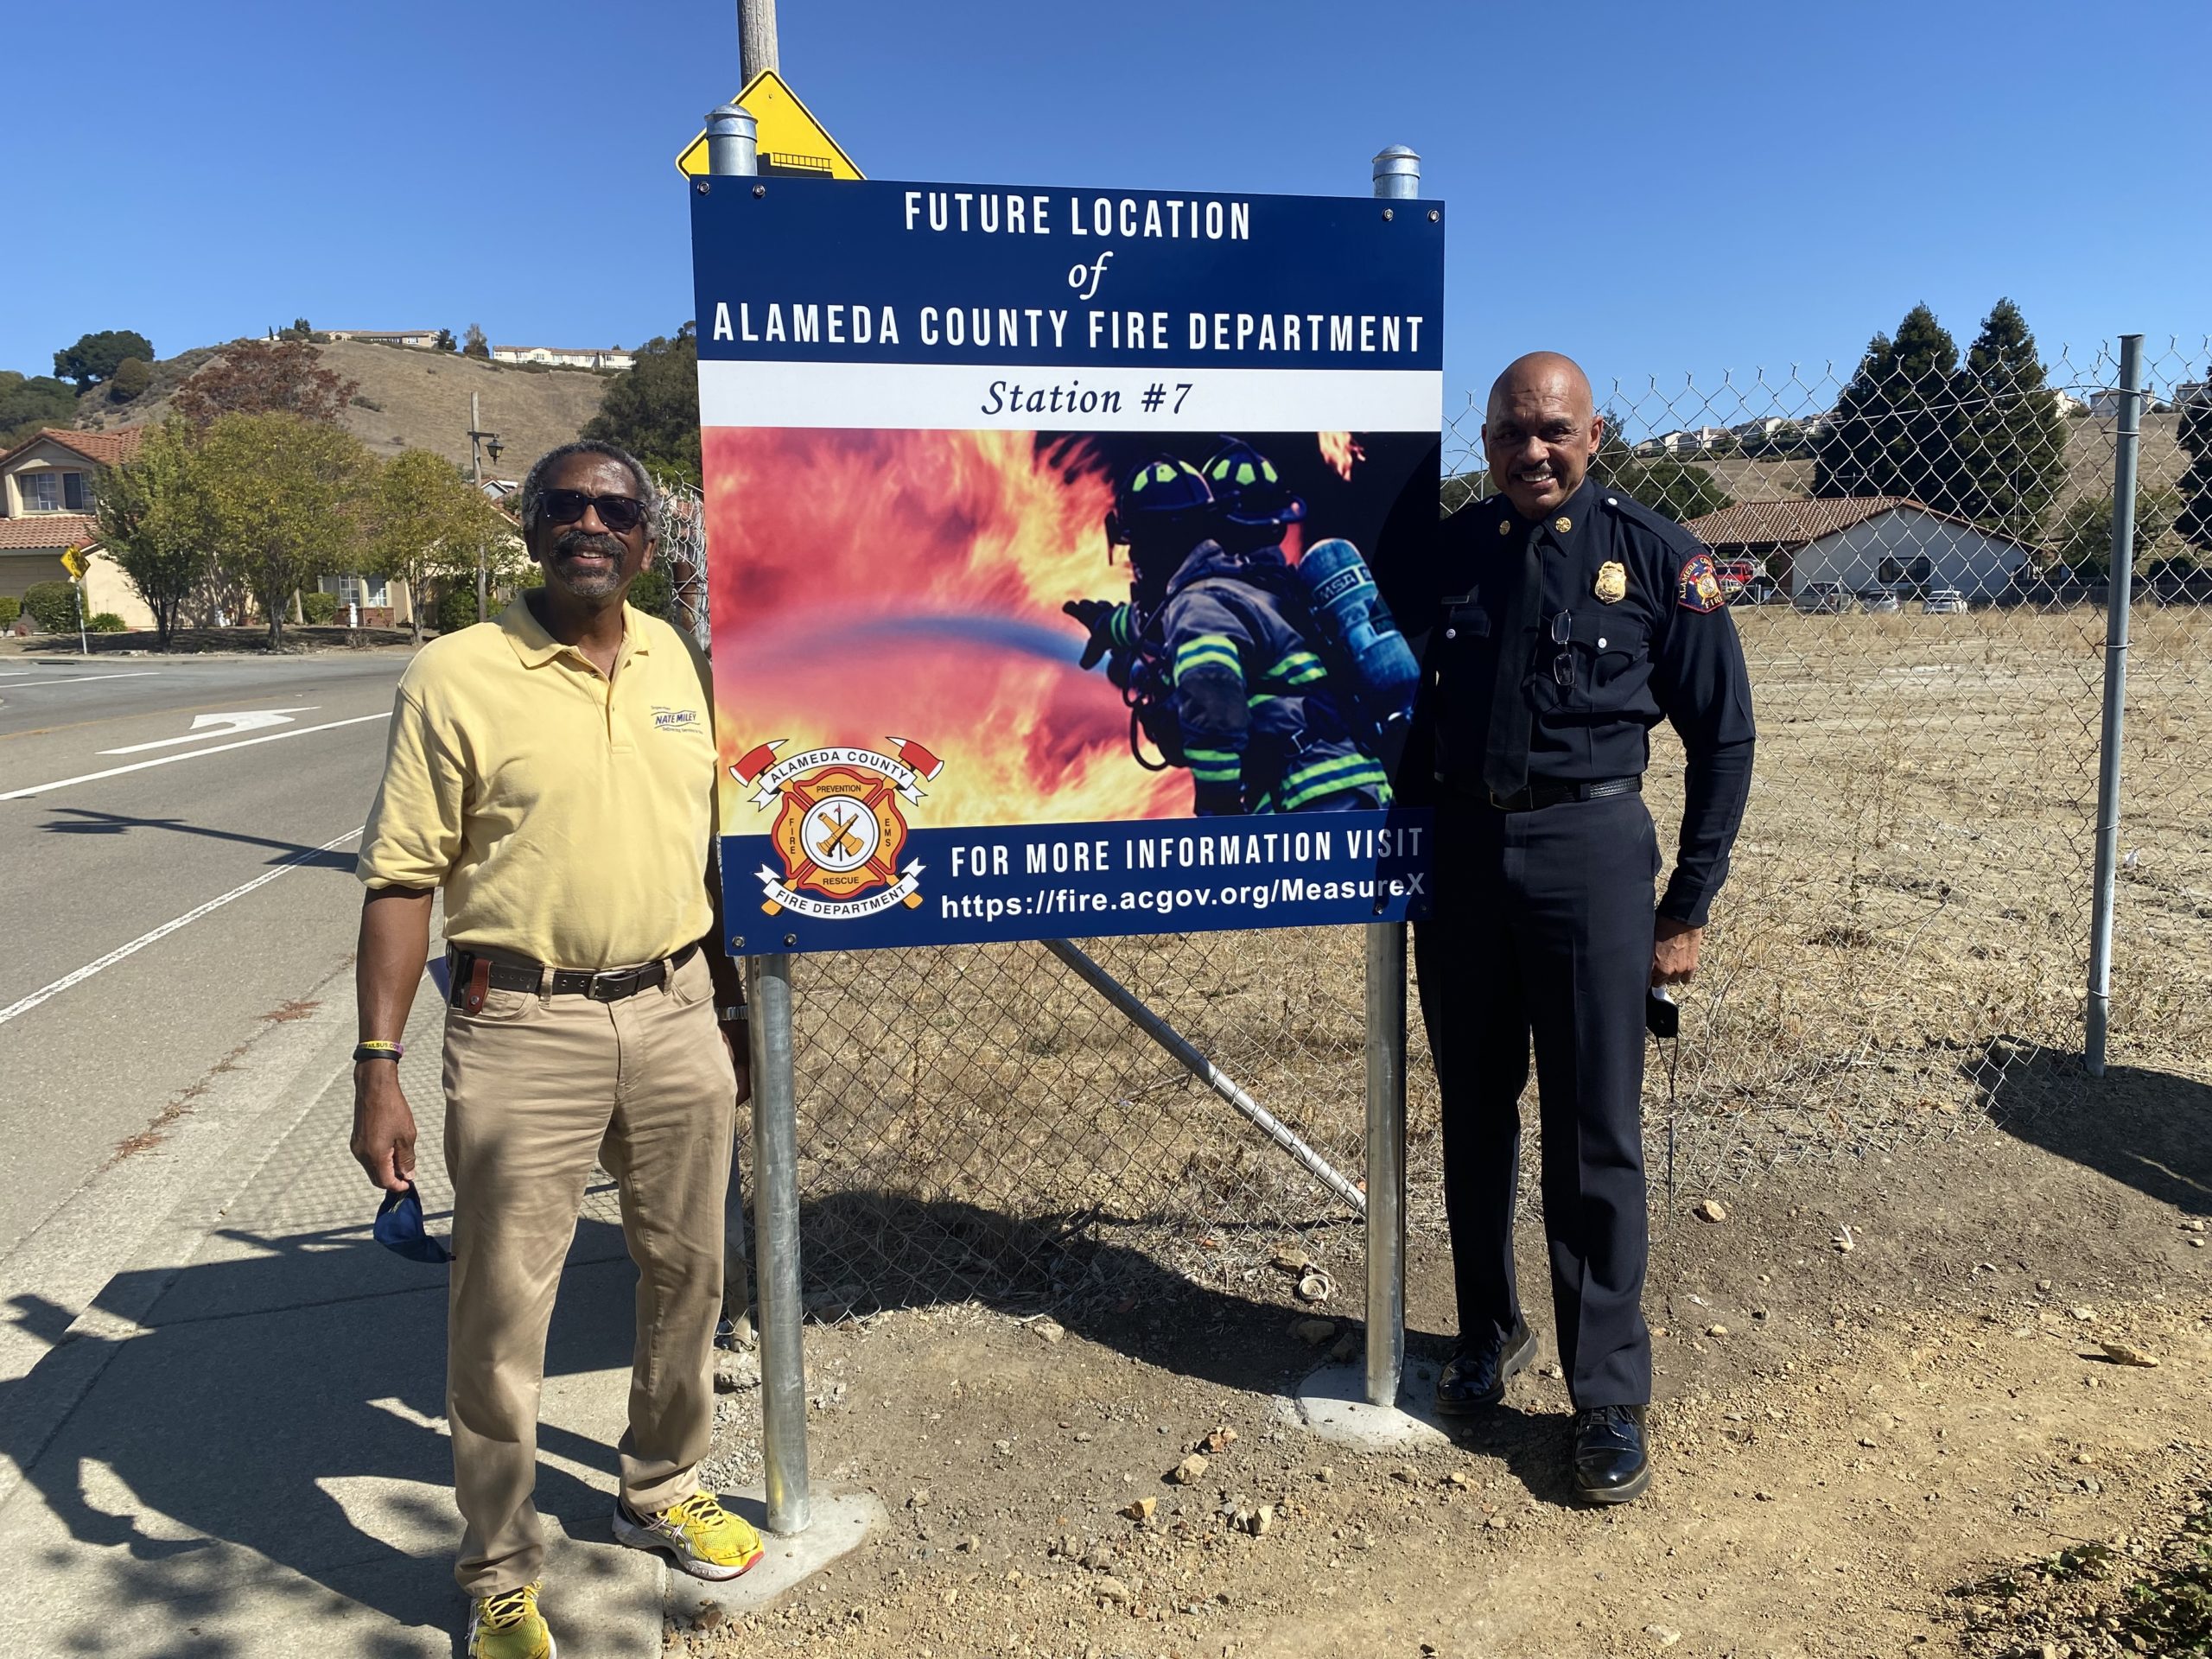 Supervisor Miley and Alameda County Fire Department Fire Chief McDonald in front of the poster for the new station 7 location